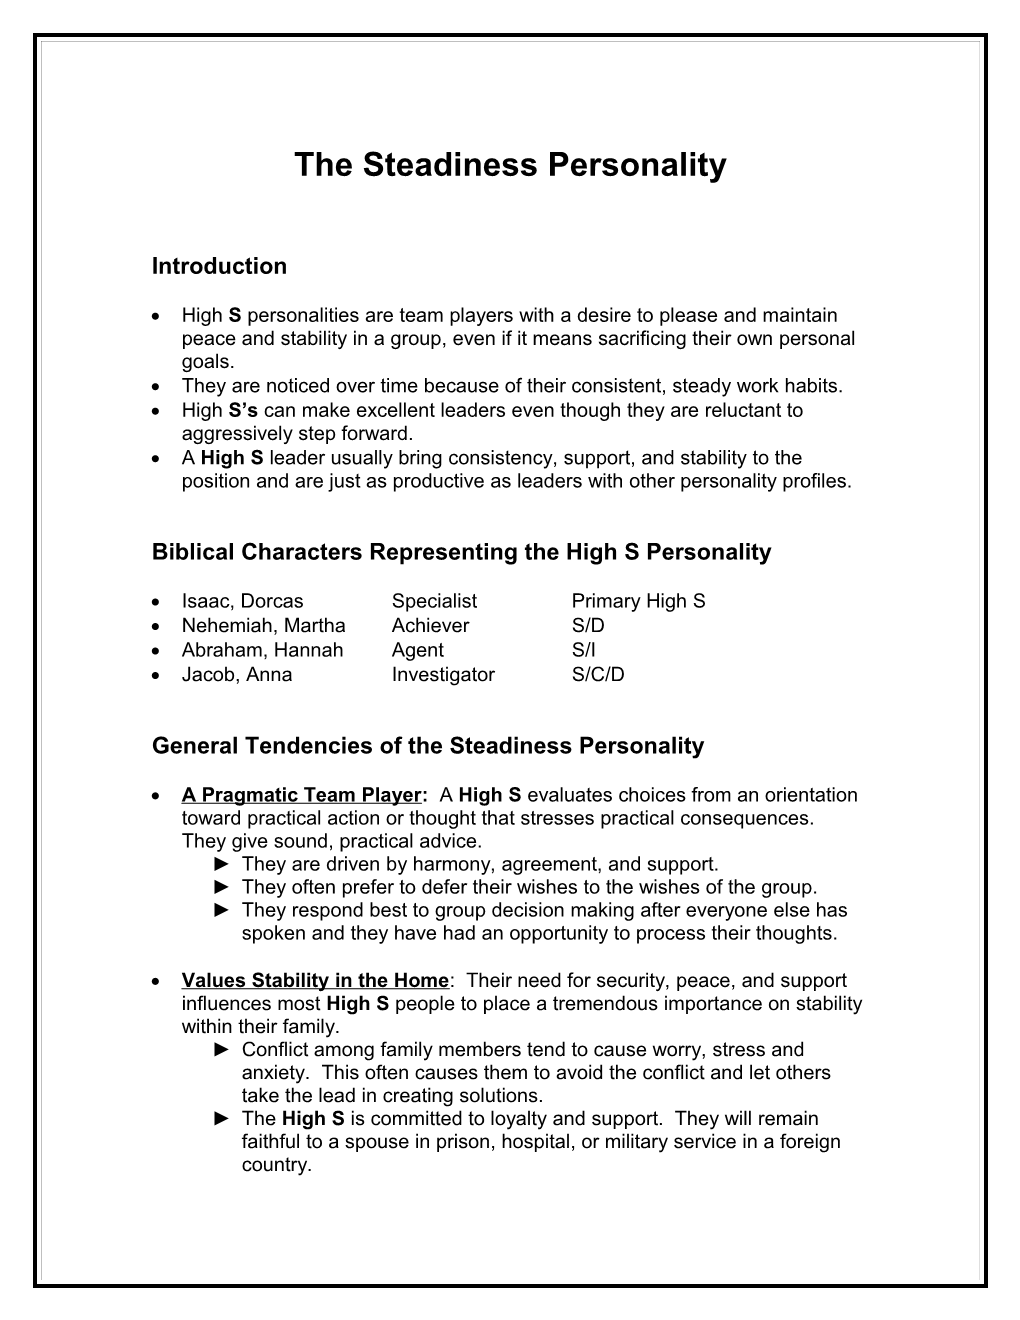 The Steadiness Personality